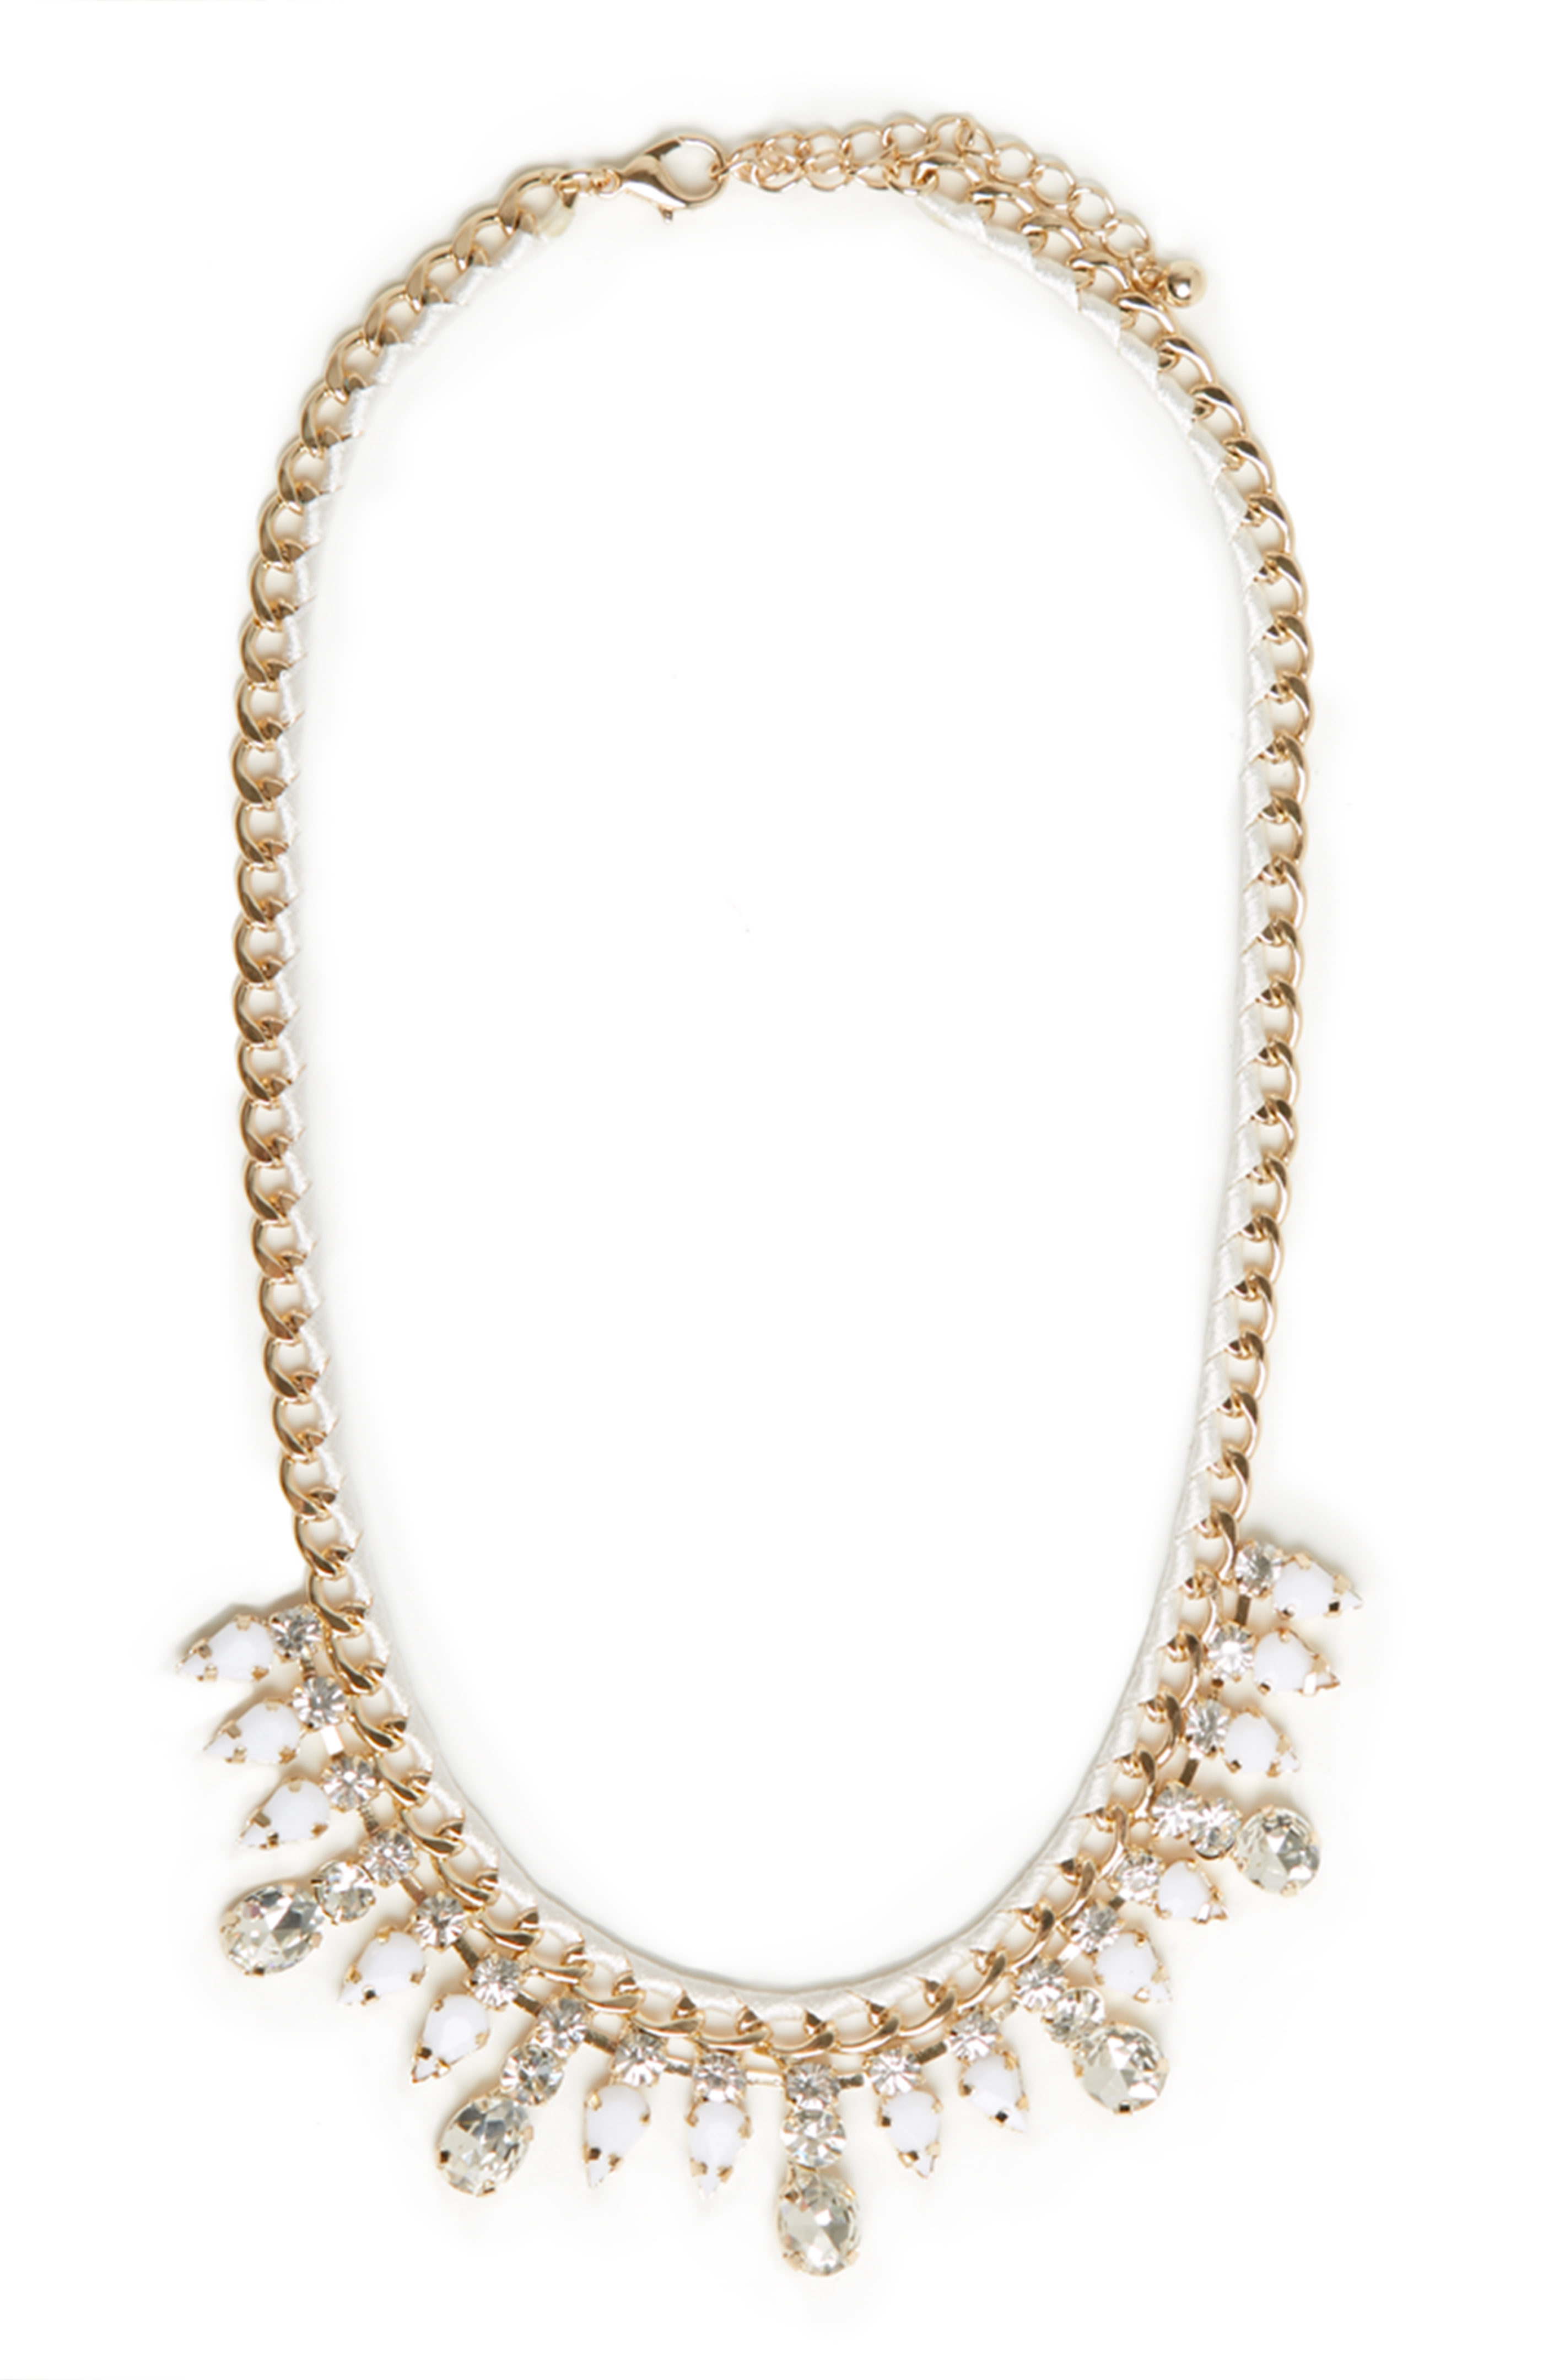 DAILYLOOK Threaded Chain & Crystal Necklace in White | DAILYLOOK